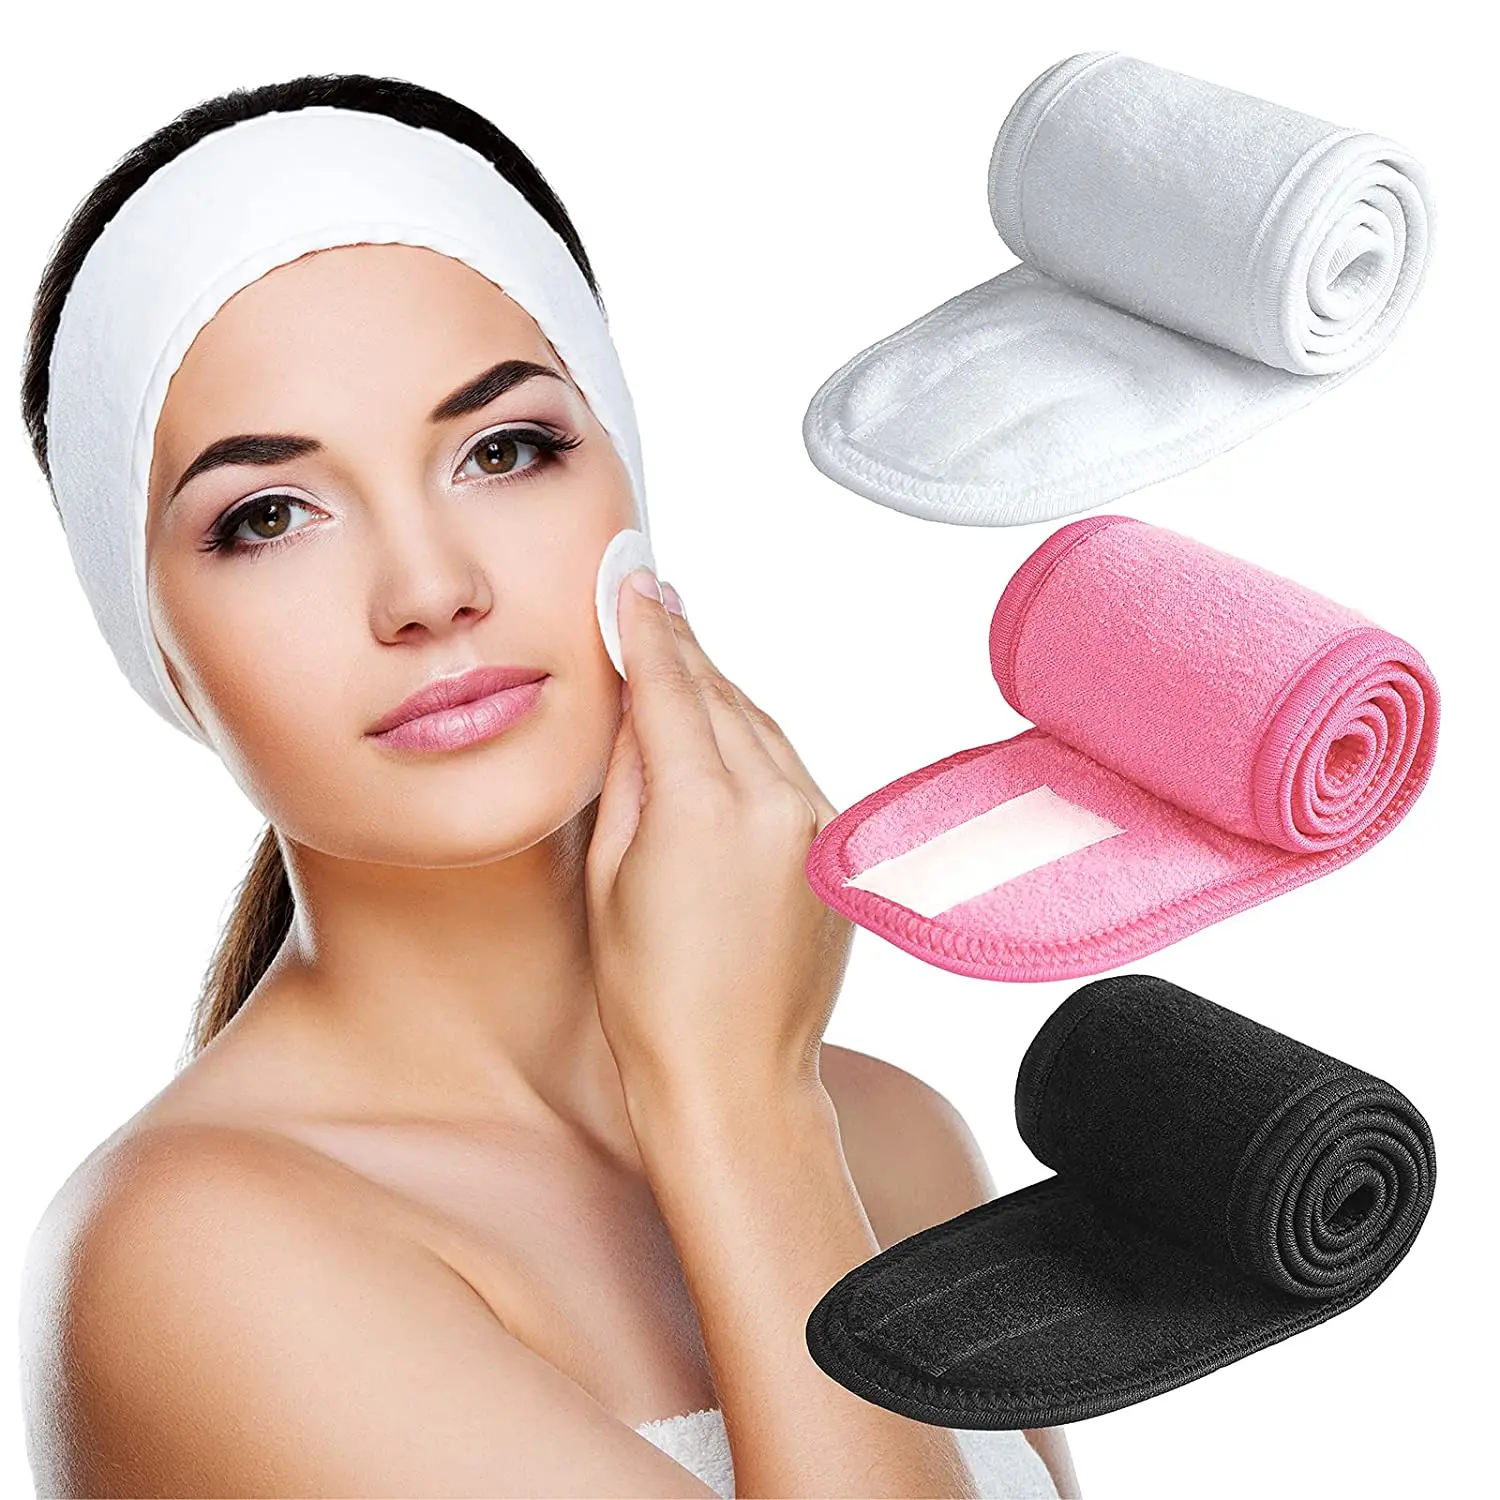 Facial Spa Headbands Makeup Shower Bath Wrap Sport Headband Terry Cloth Stretch Towel With Magic Tape Hair Accessories For Women